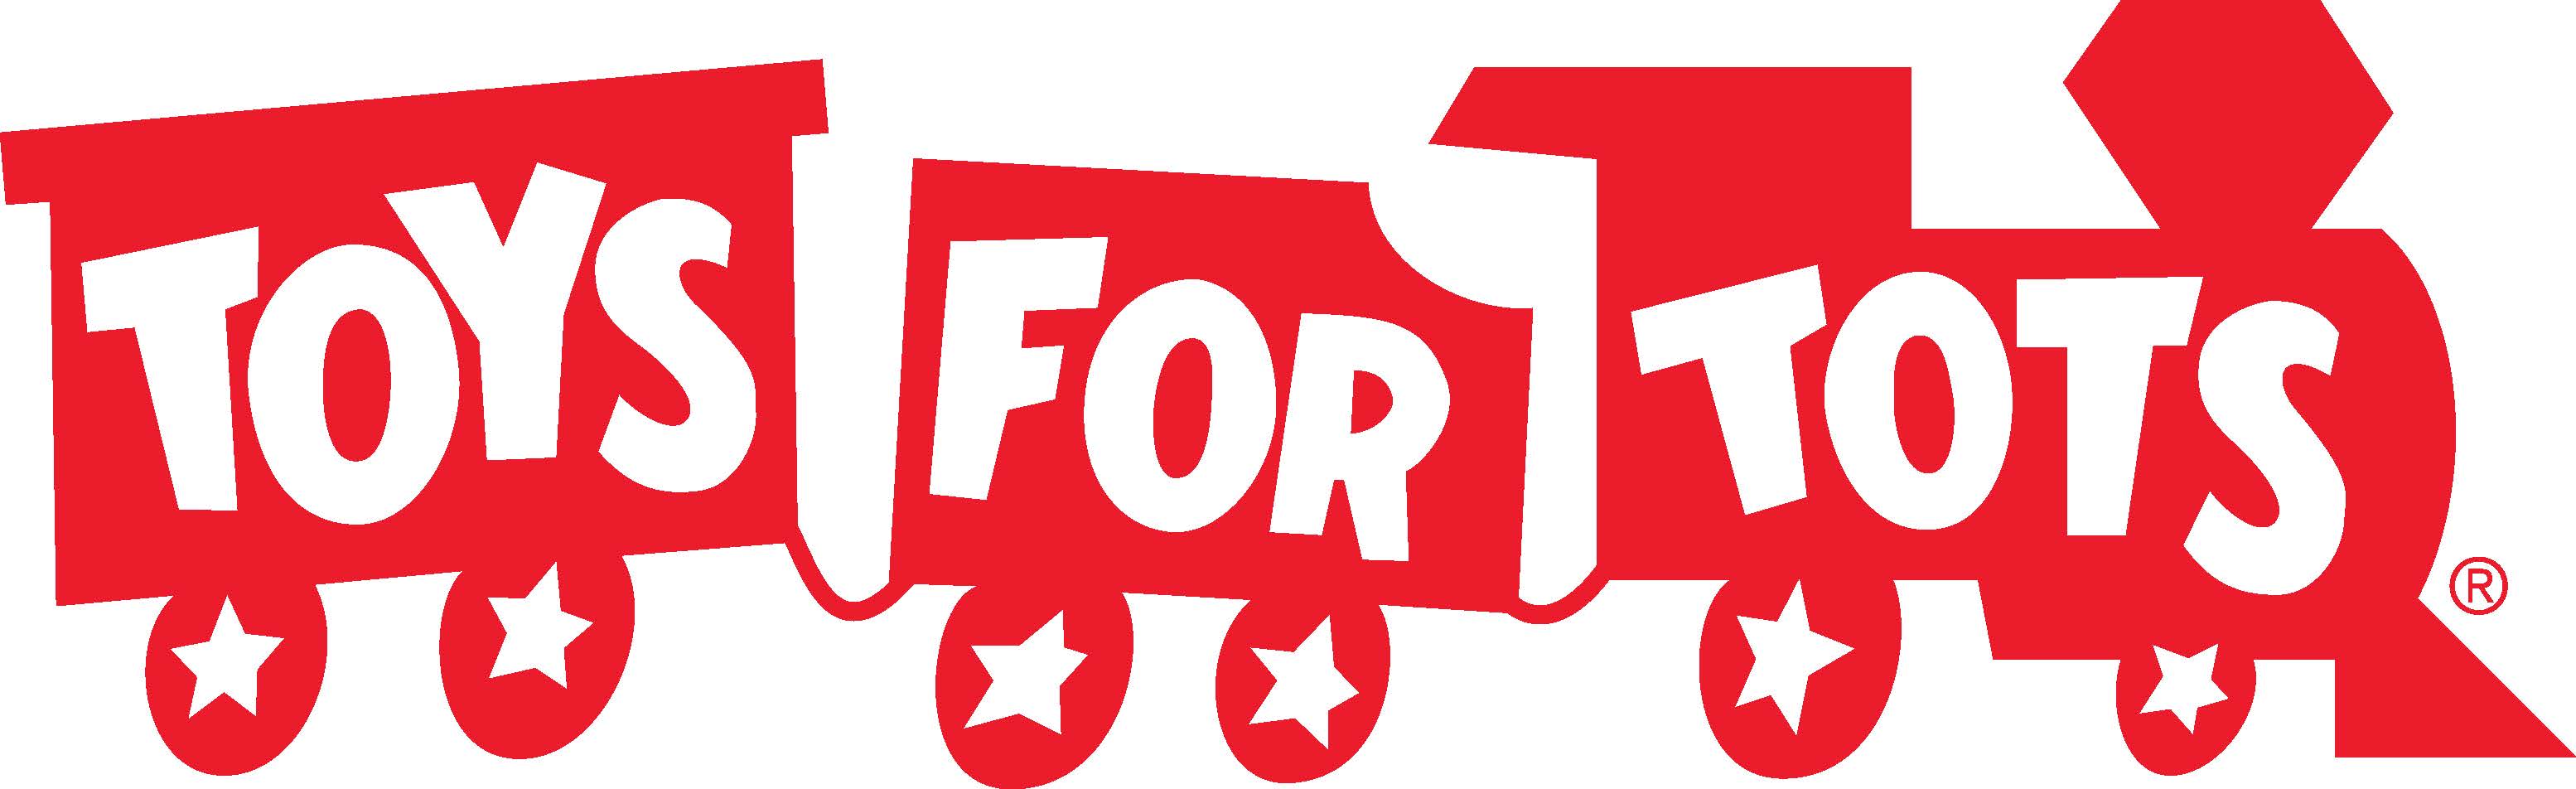 Help us Support Toys for Tots this Year!